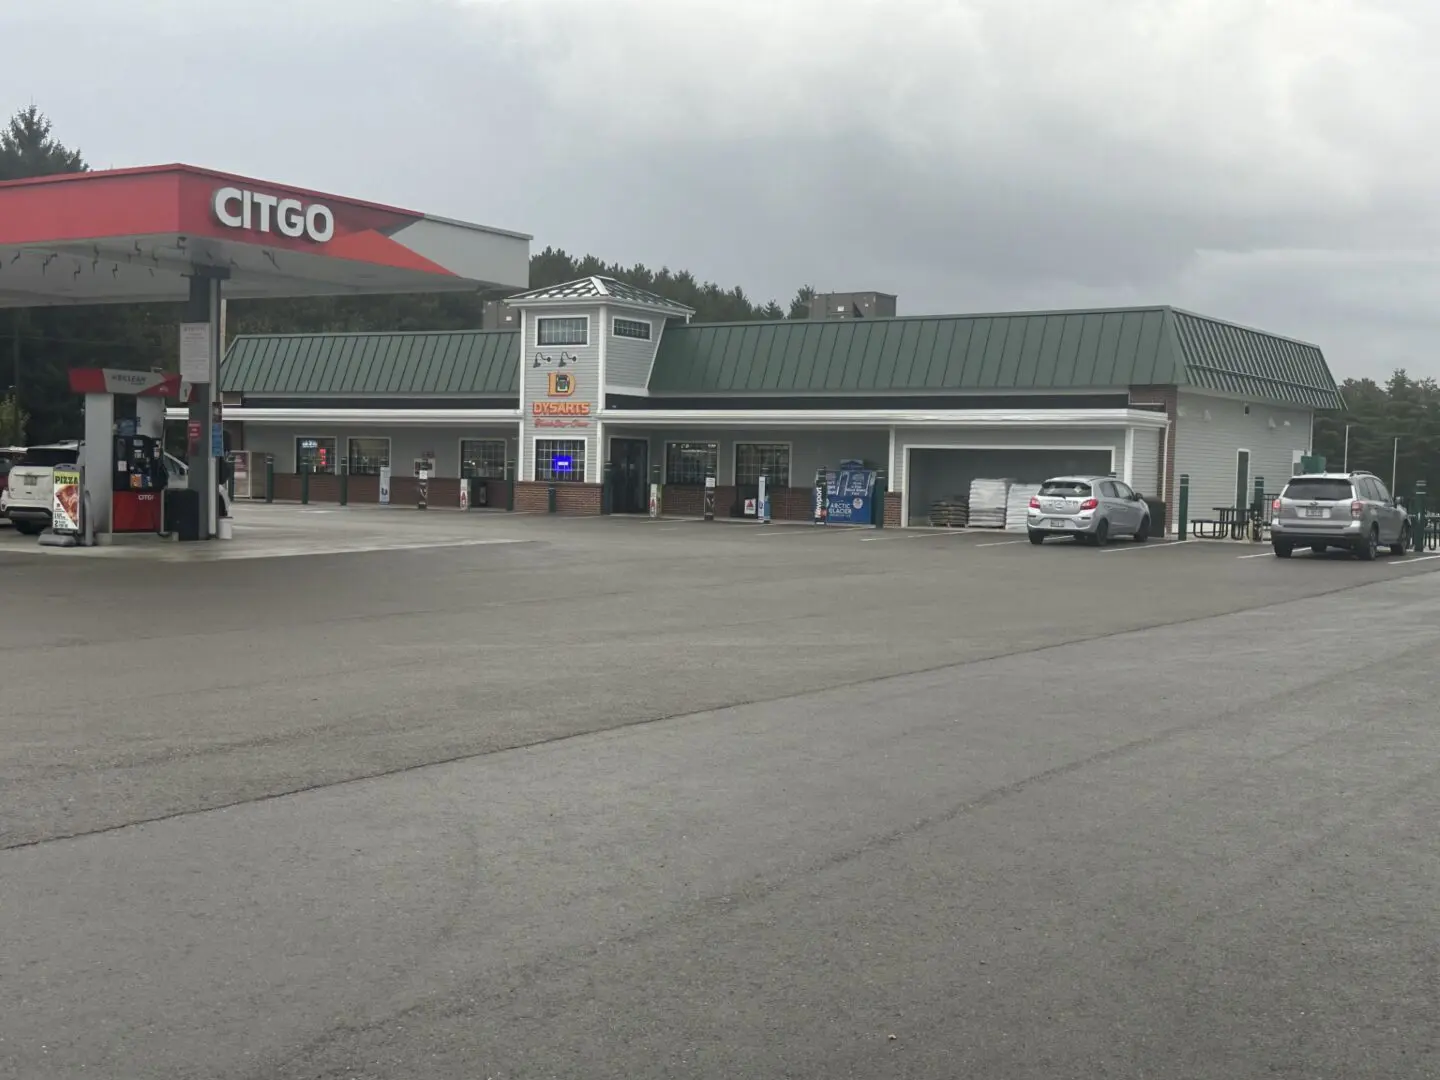 A large gas station with cars parked in front of it.